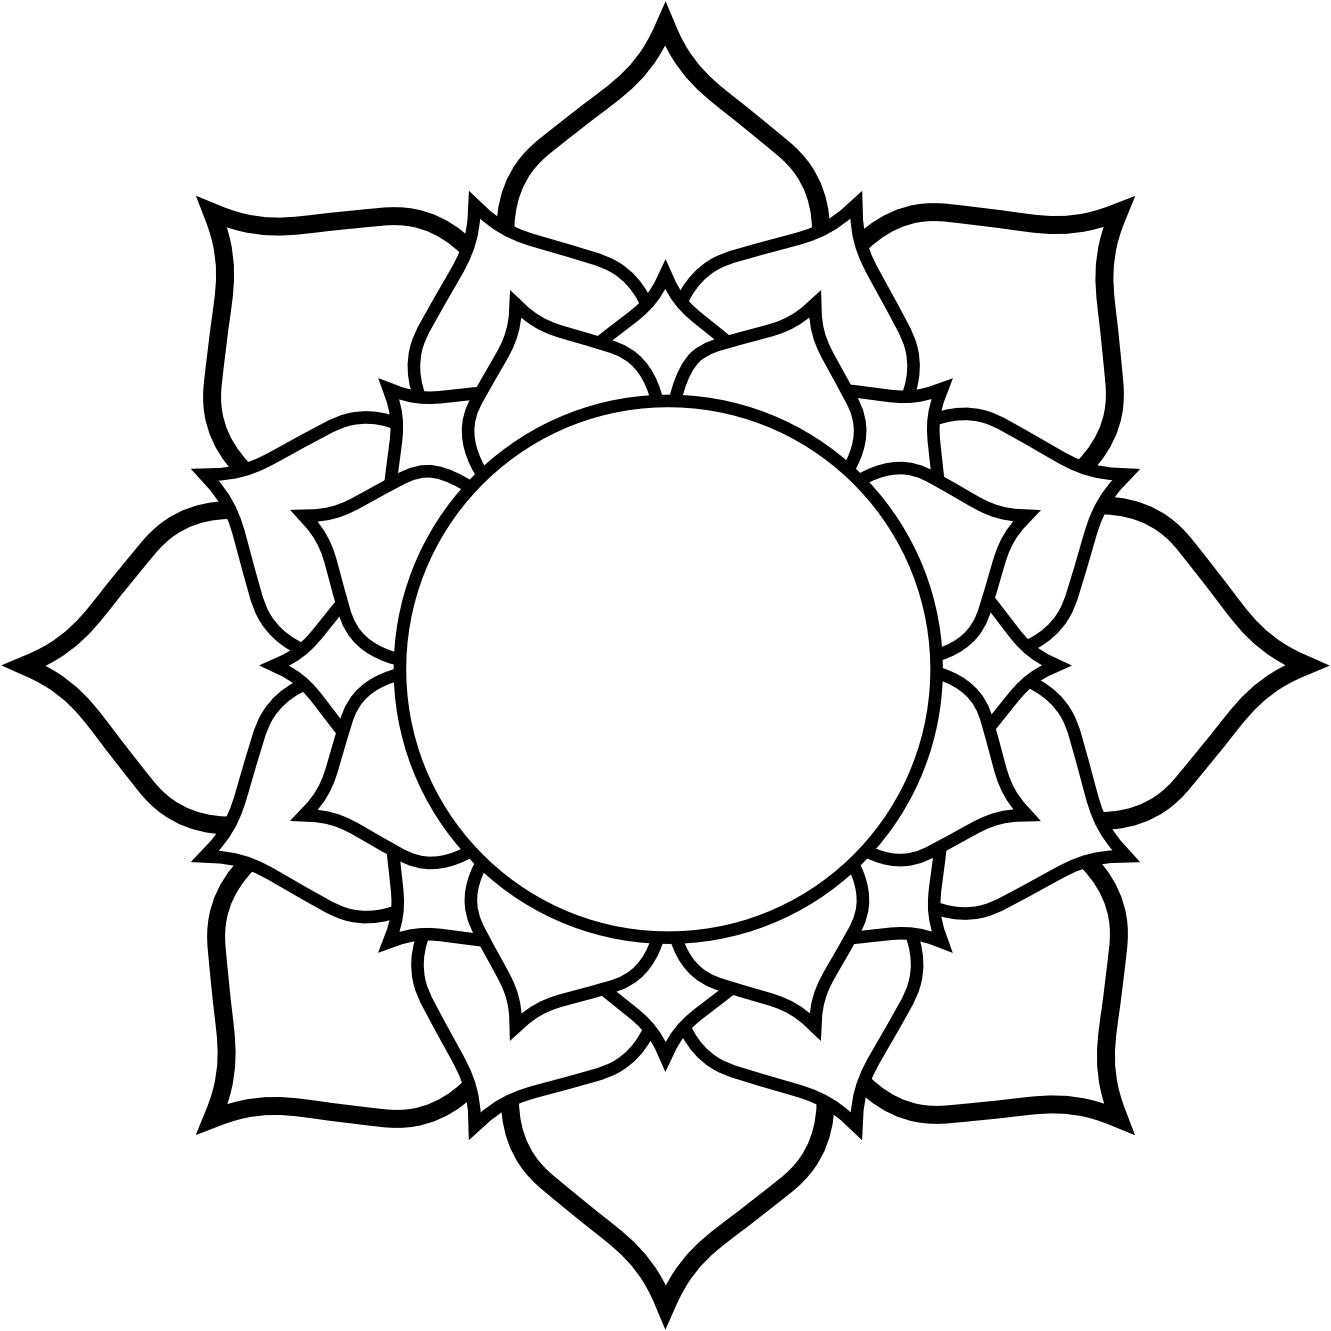 How To Draw Lotus Flower Top View - ClipArt Best